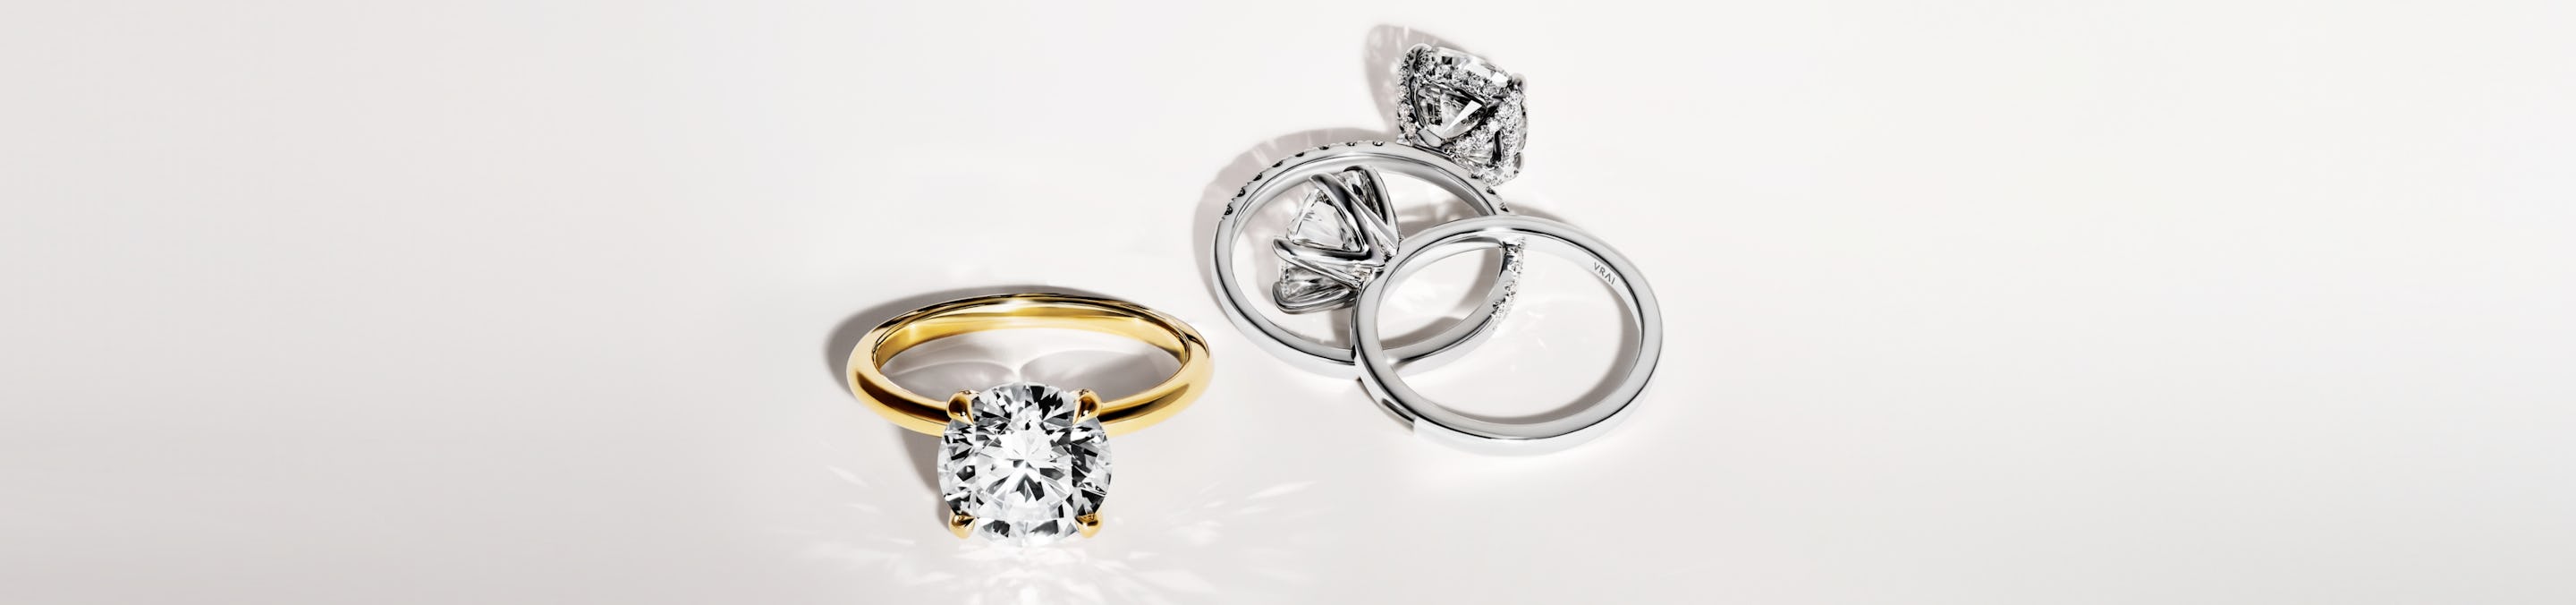 three engagement rings in classic solitaire styles in yellow gold, white gold and platinum